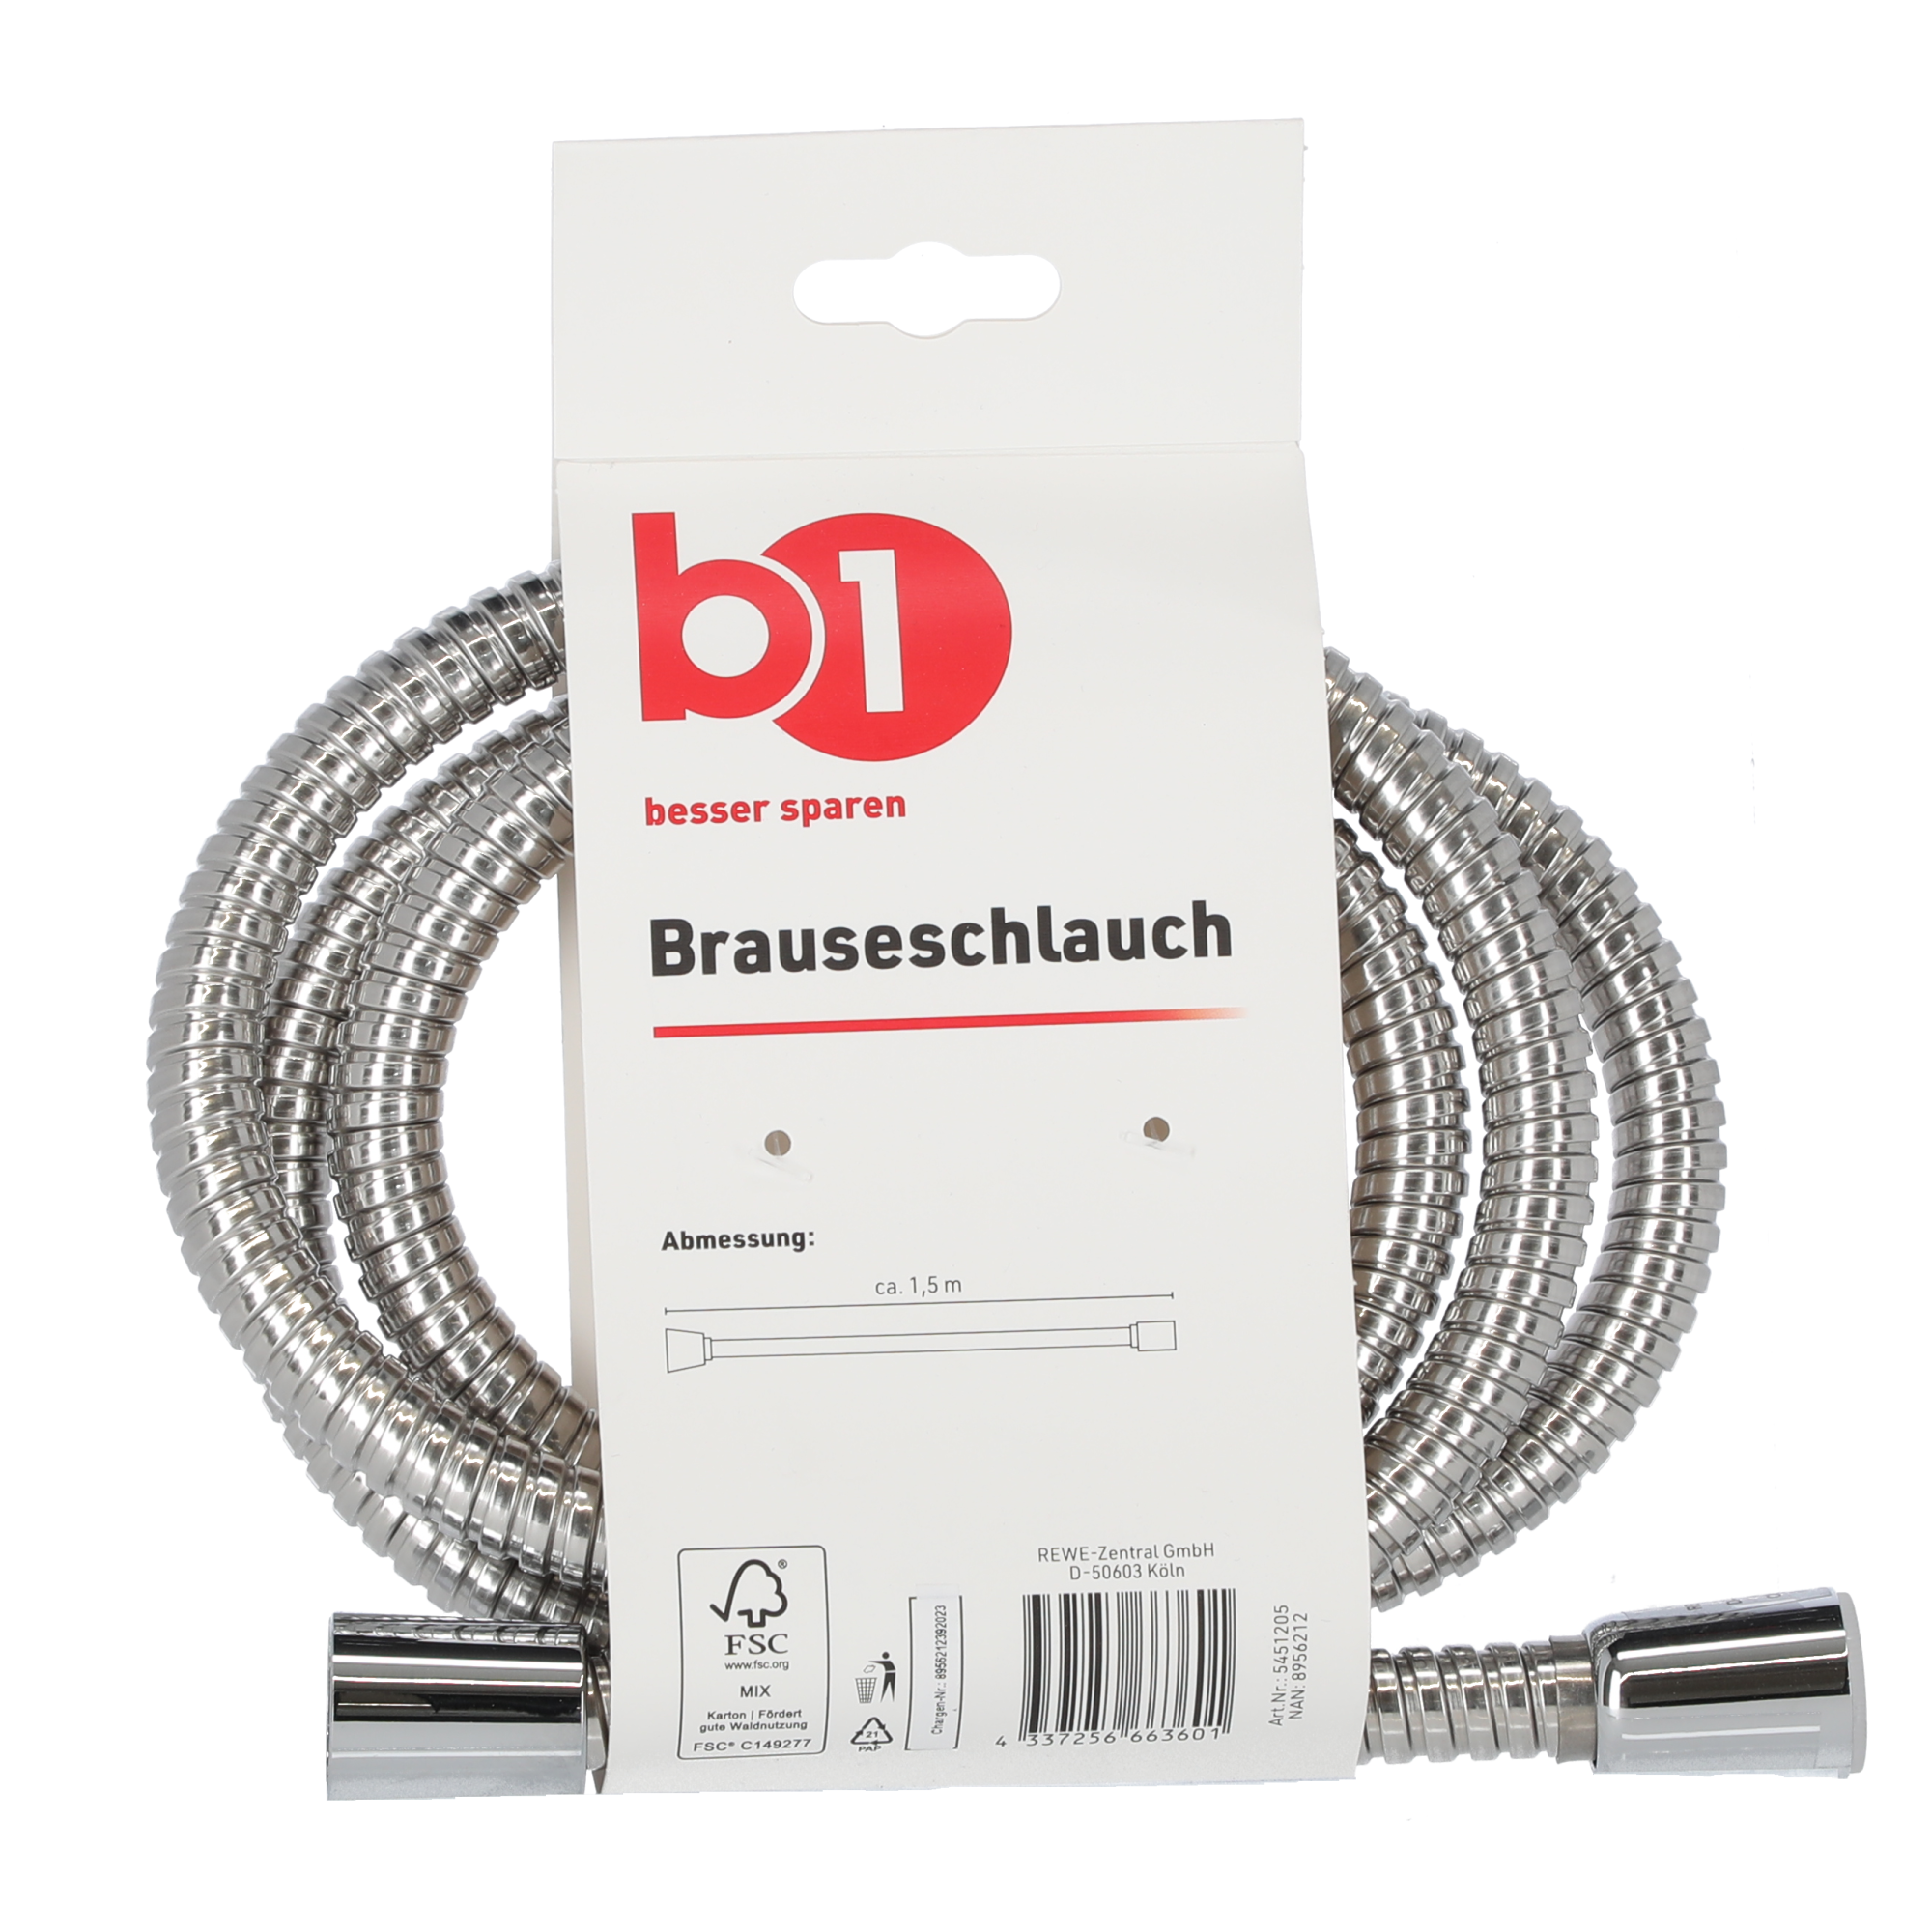 Brauseschlauch Metall 150 cm + product picture